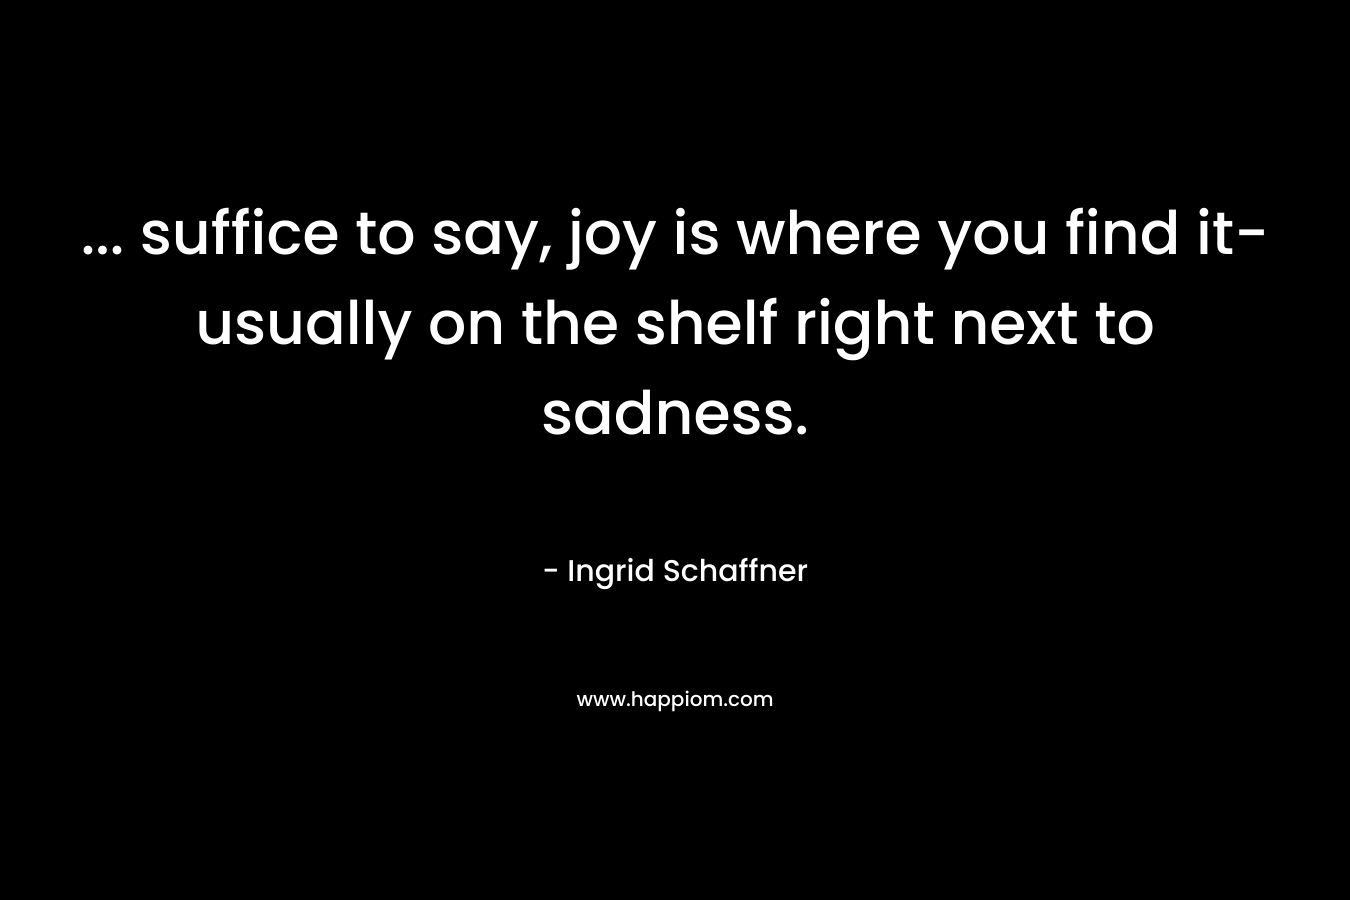 ... suffice to say, joy is where you find it- usually on the shelf right next to sadness.